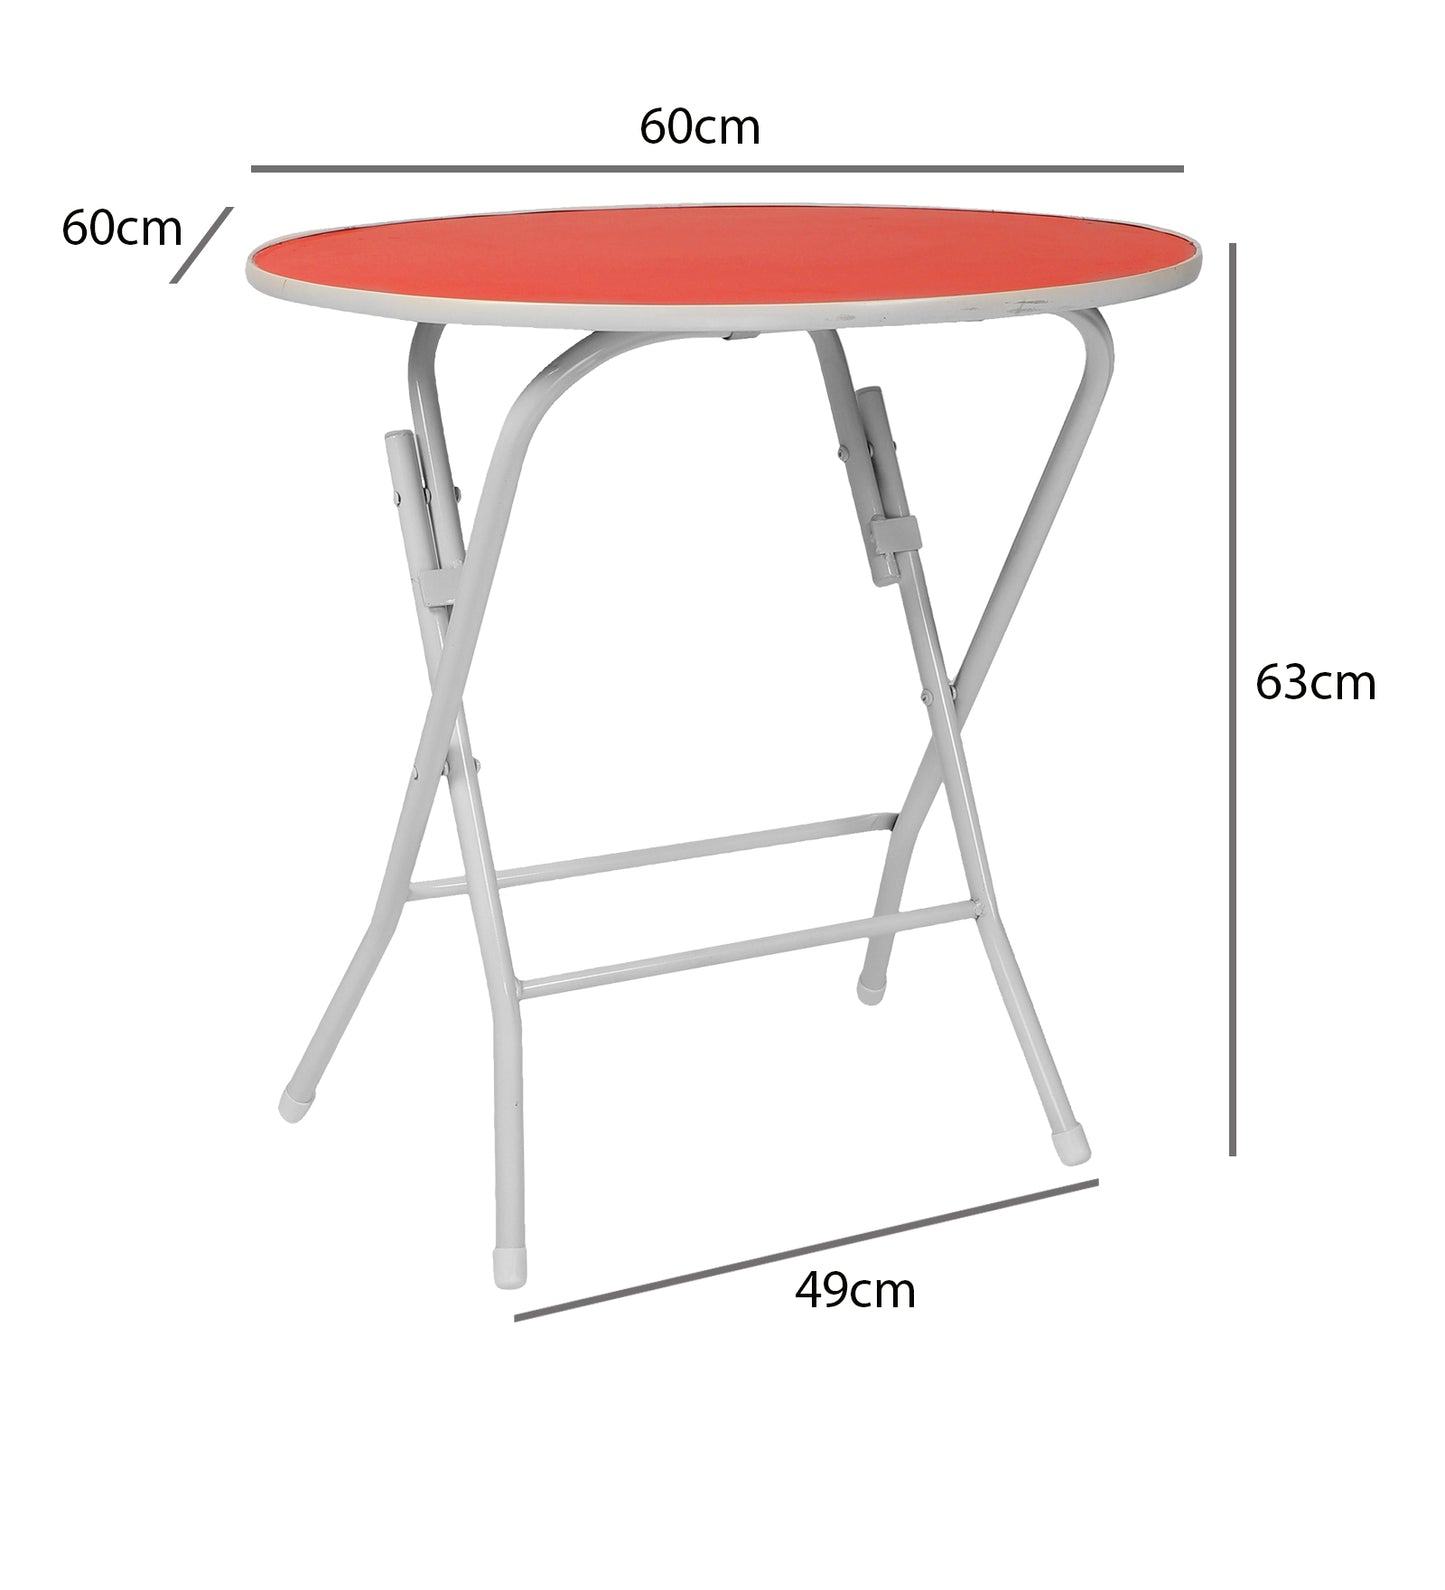 Foldable Round Table Chair Set Red (5-12 yrs, Large)